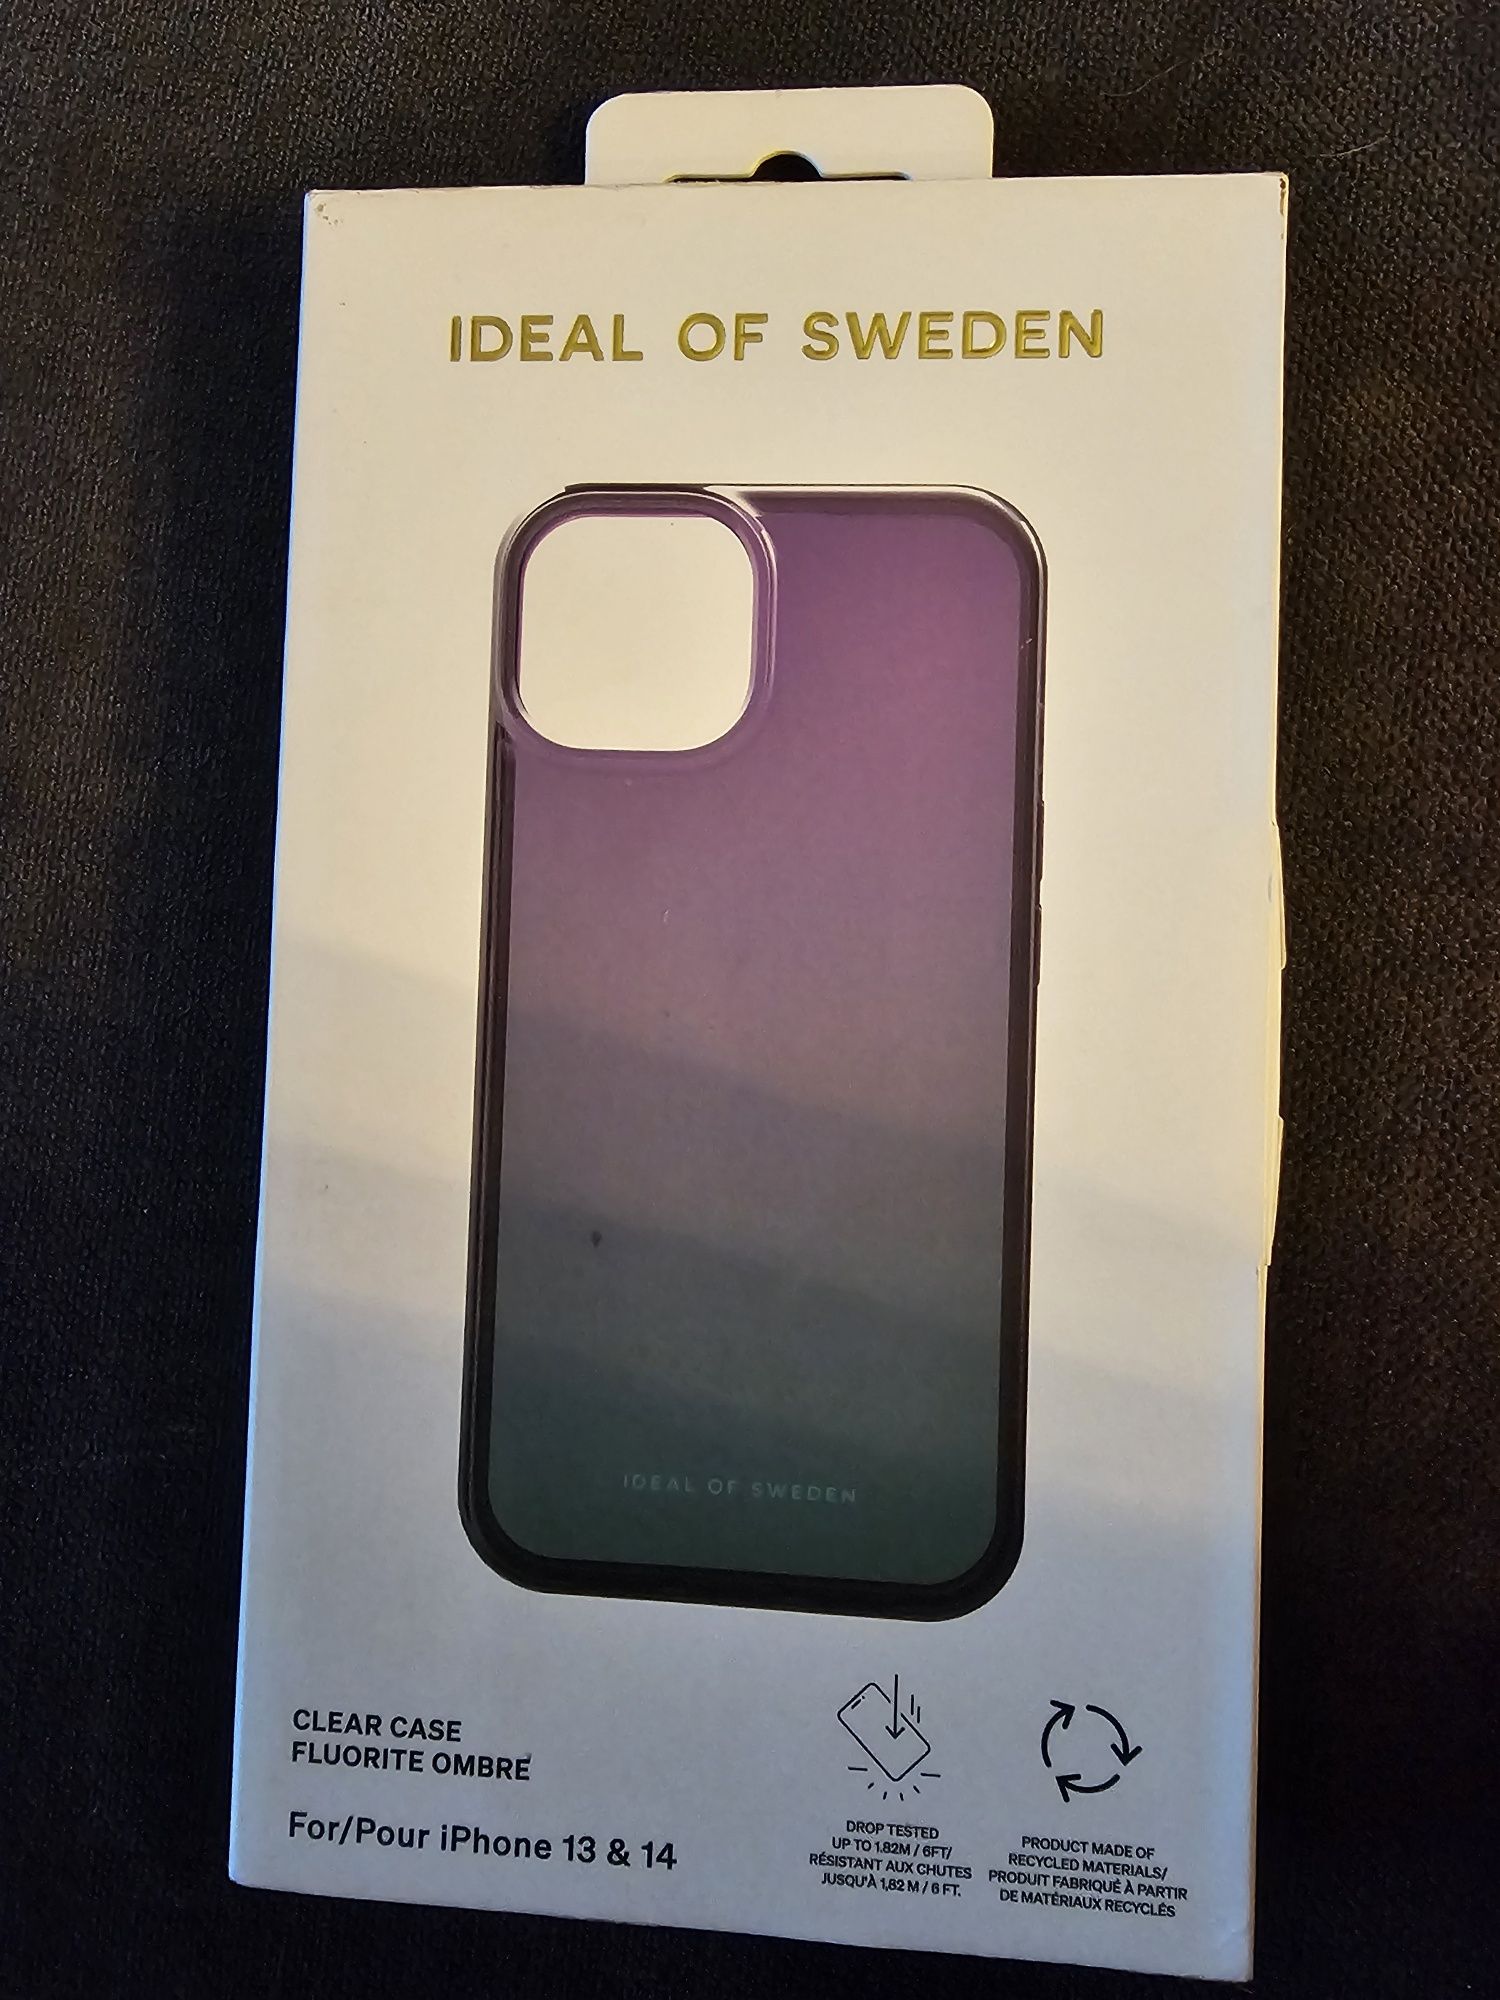 Pokrowiec iphone 13 i 14 ideal of sweden